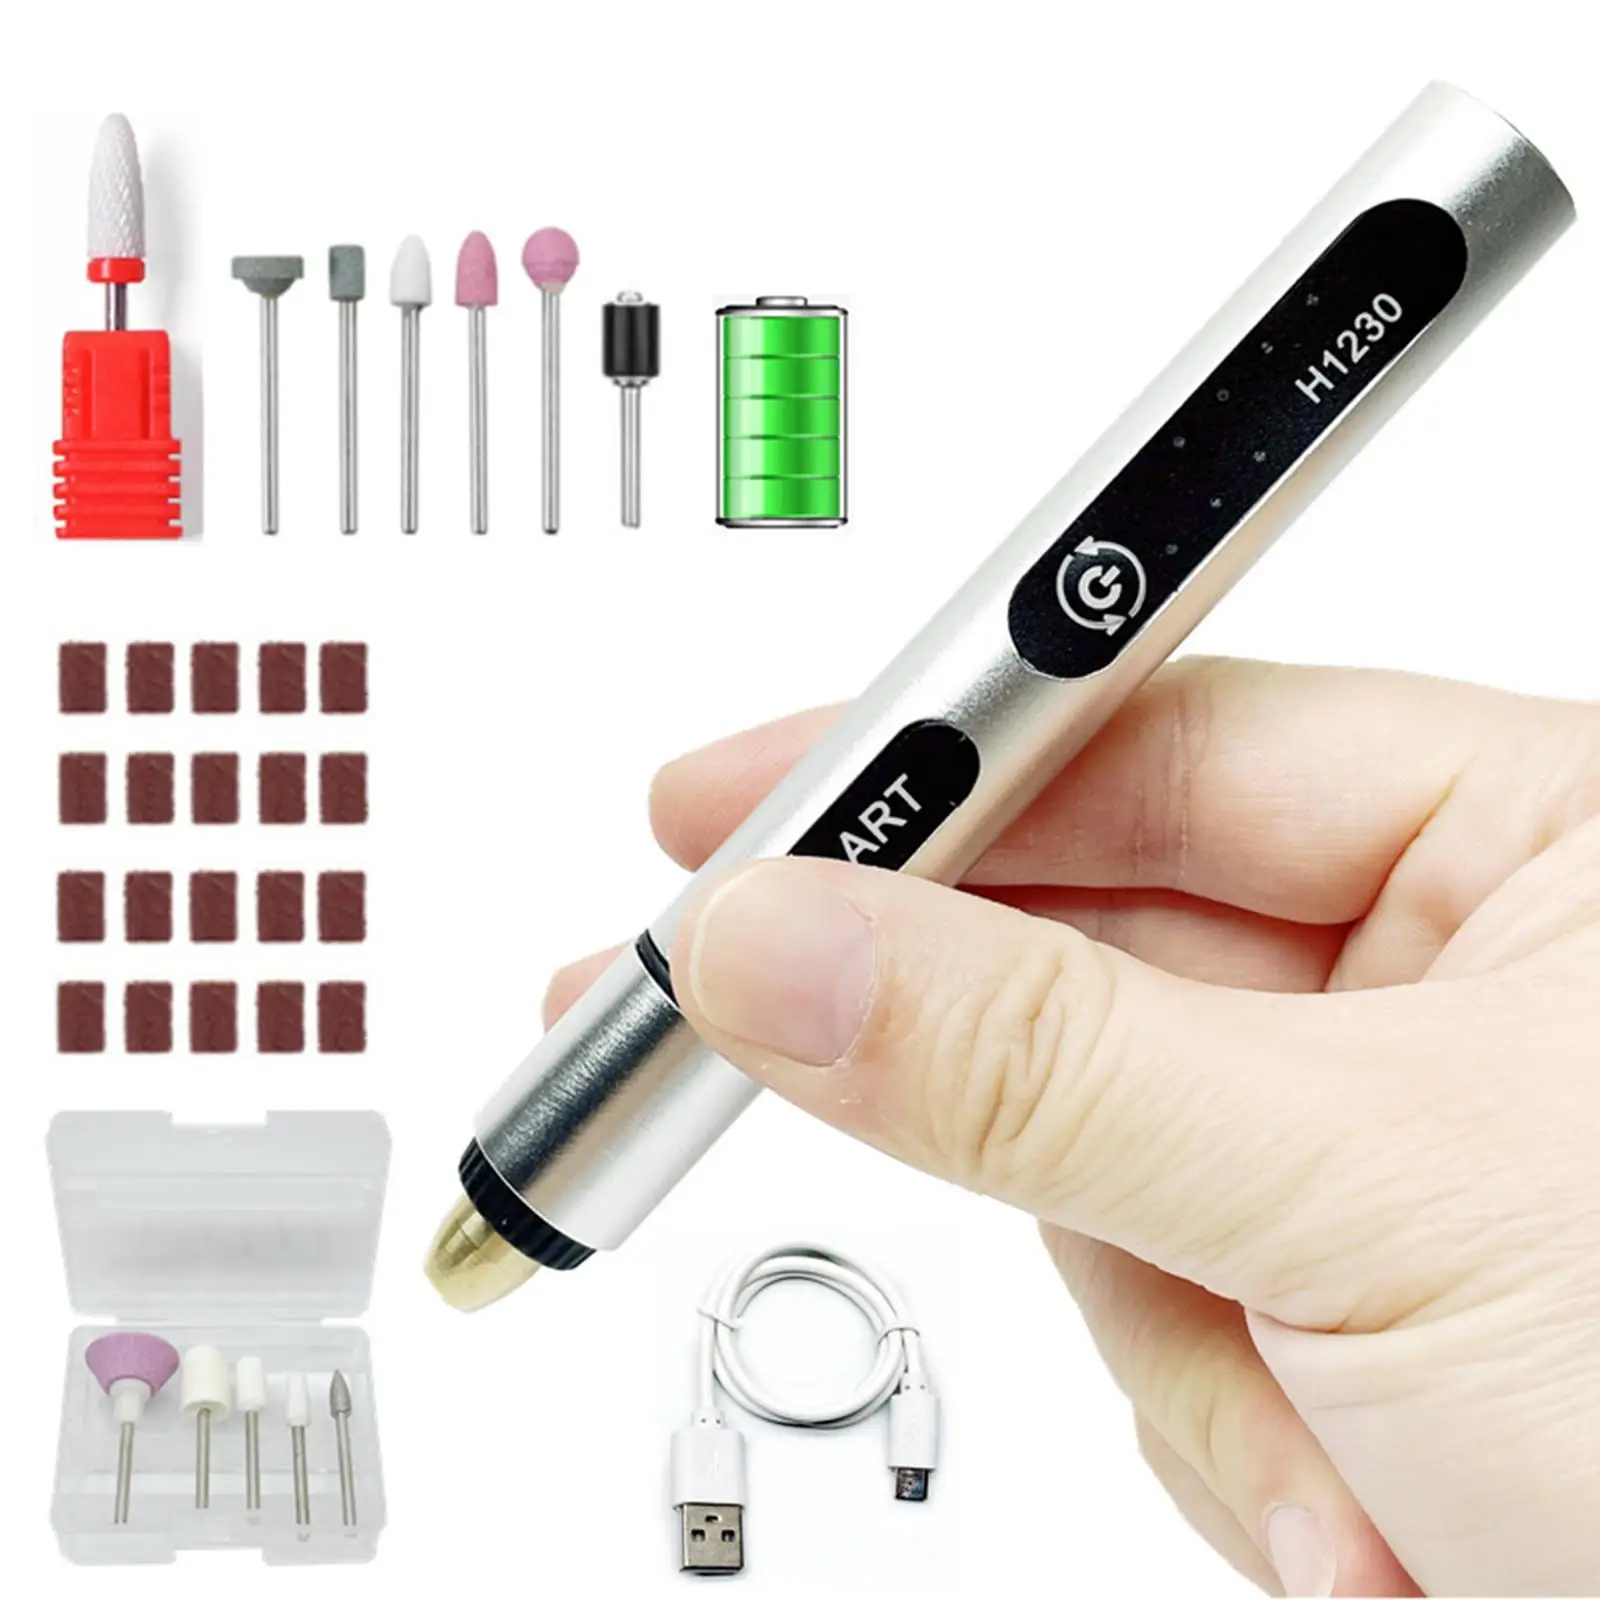 Multifunction Electric Nail Drills Kit USB Charging for Crafting Projects